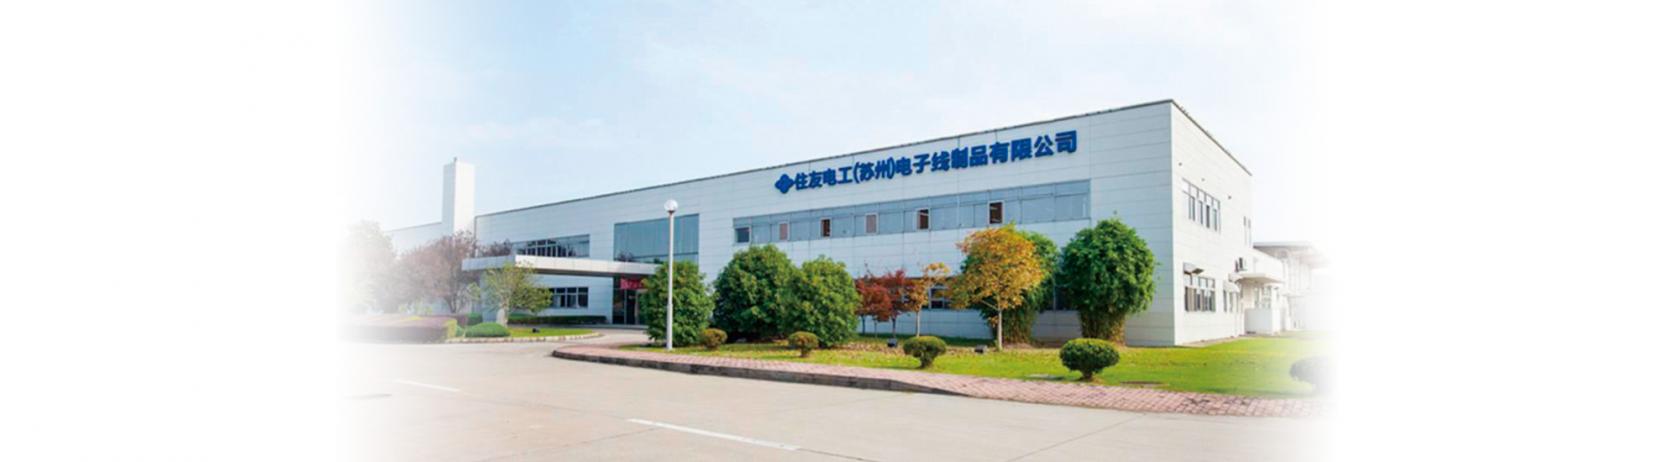 Sumitomo Electric Interconnect Products (Suzhou), Ltd., where the China Analysis Technology Center is located